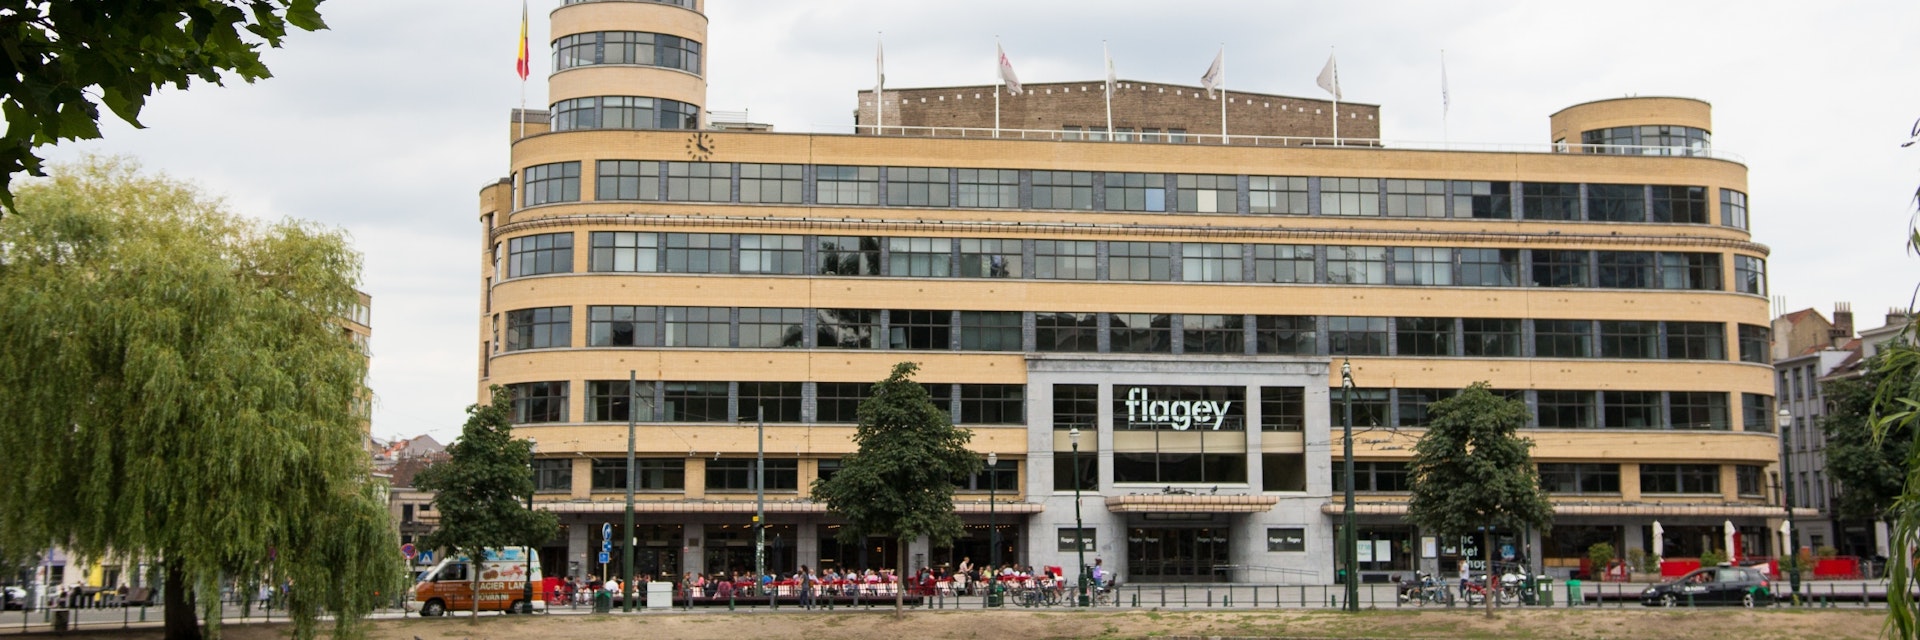 Flagey building from across the pond